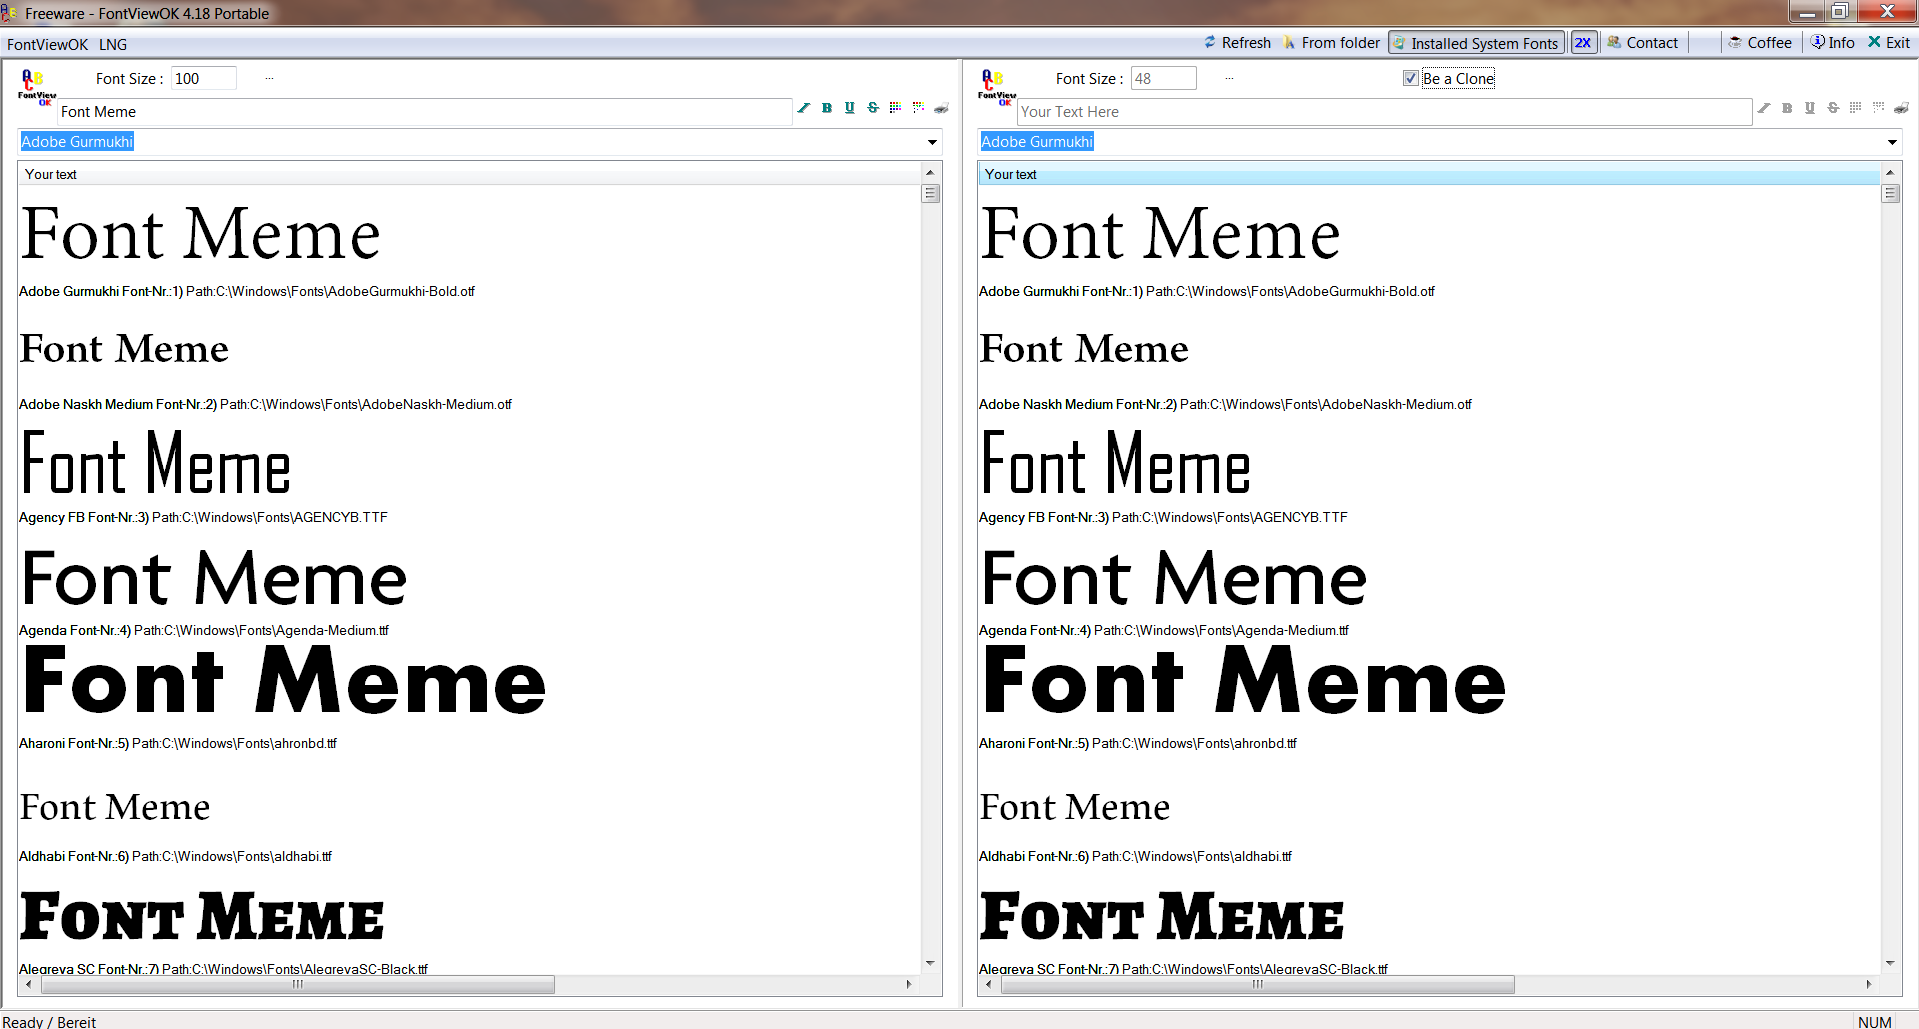 FontViewOK 8.21 instal the new version for apple